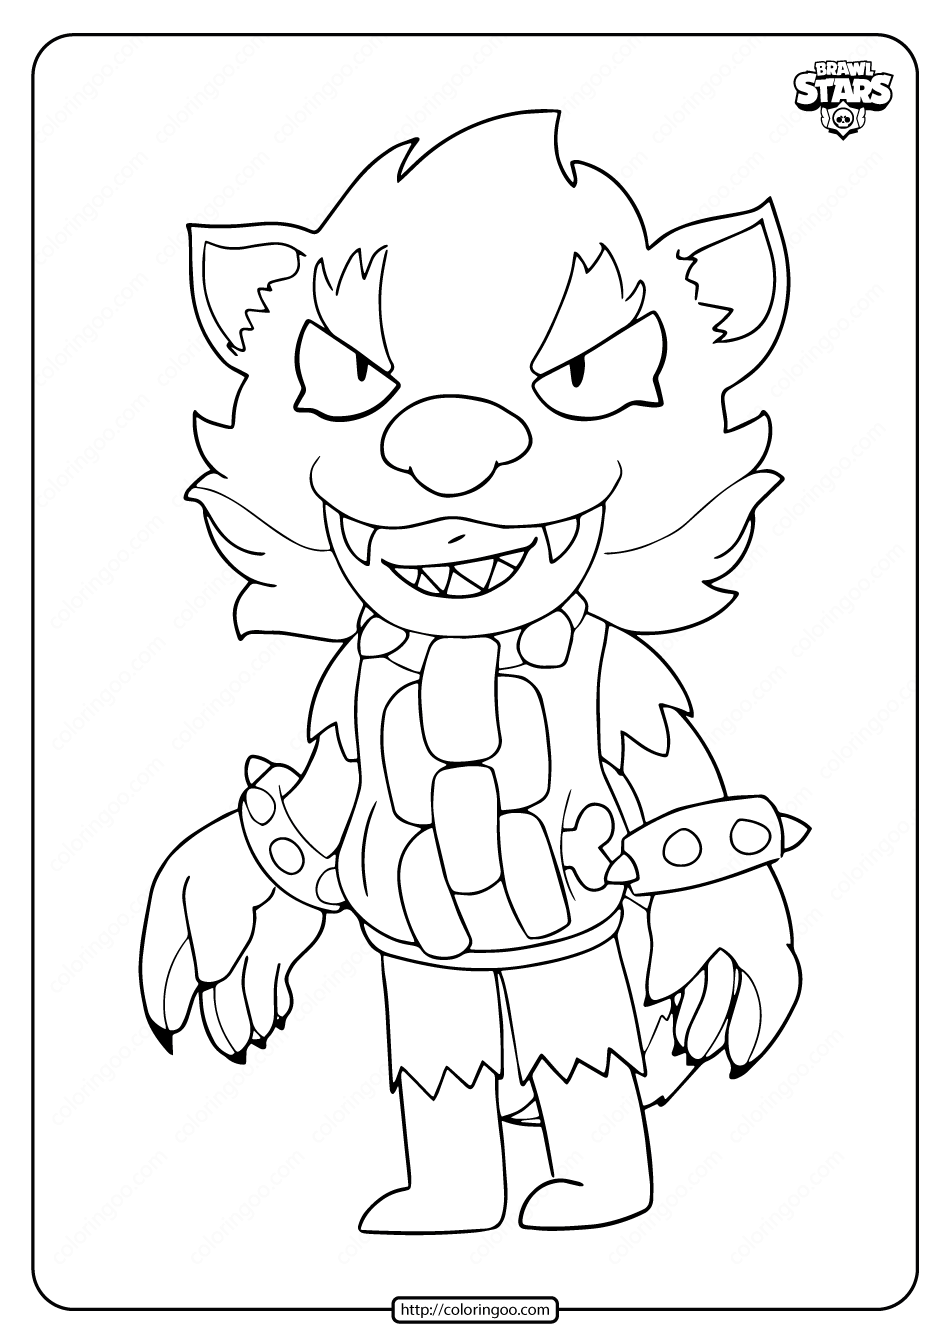 werewolf leon brawl stars coloring pages